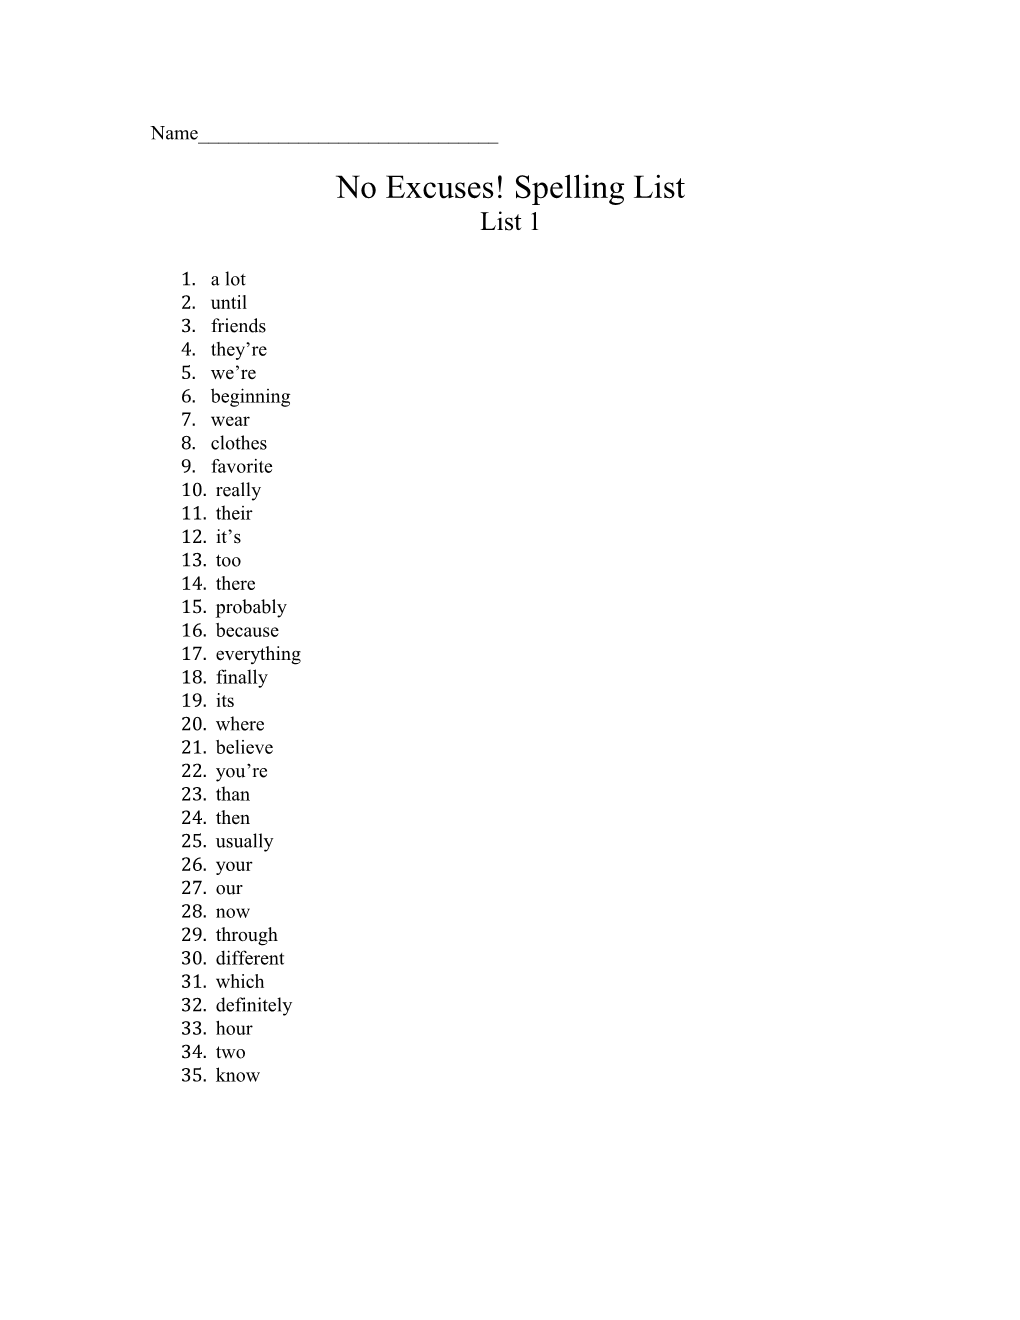 No Excuses! Spelling List